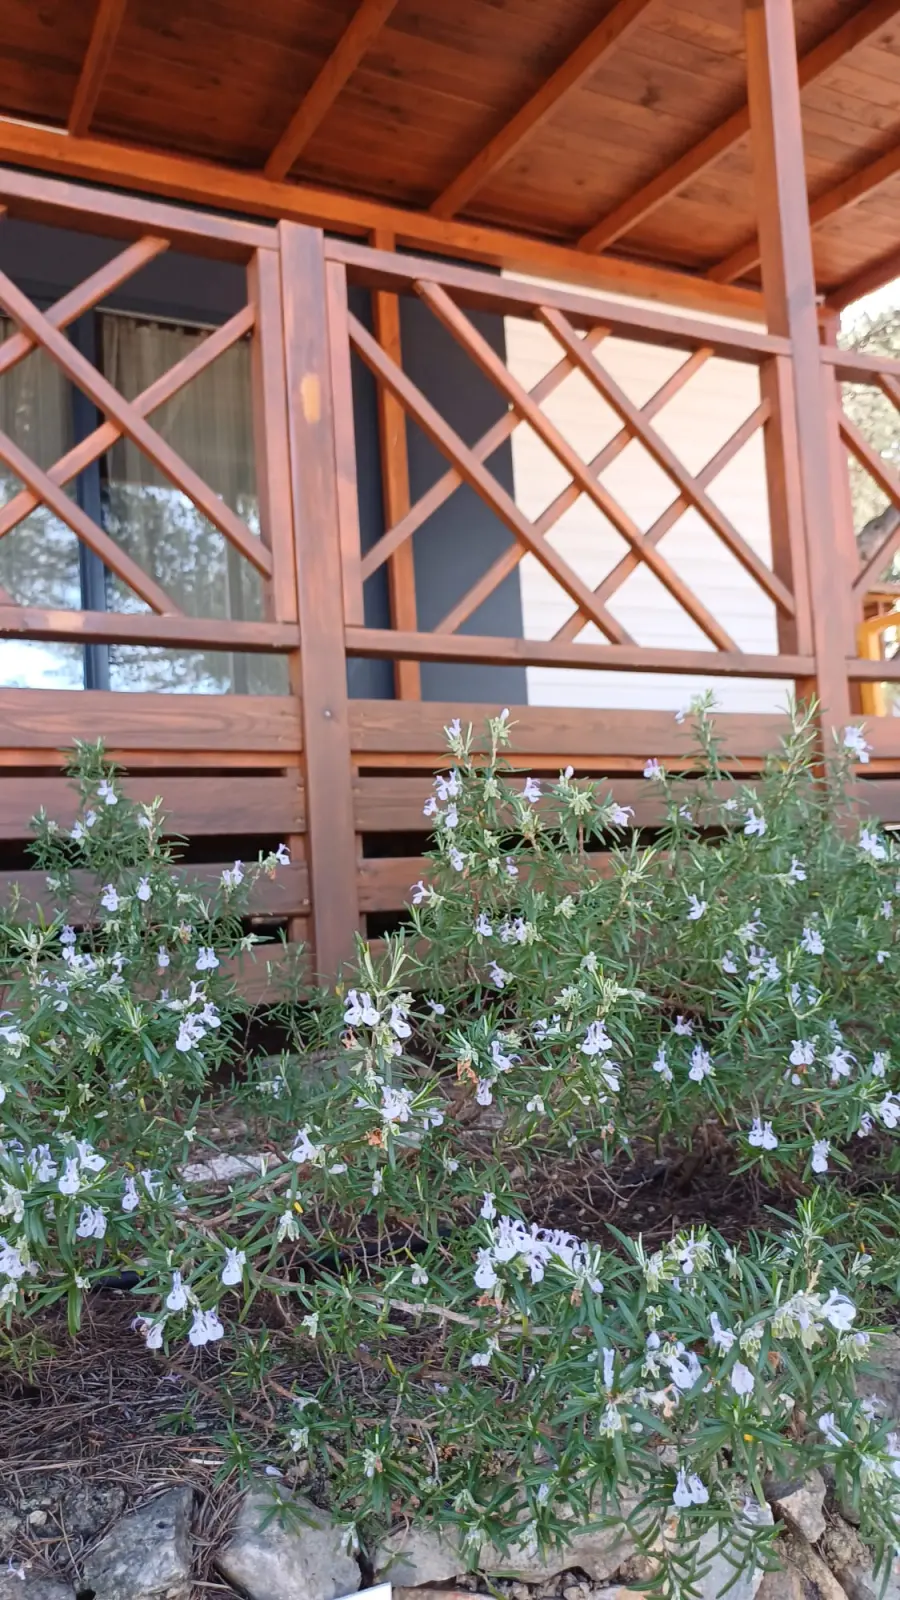 Rosemary bush in front of a mobile home. The rosemary bush has green needle-like leaves and small blue flowers.